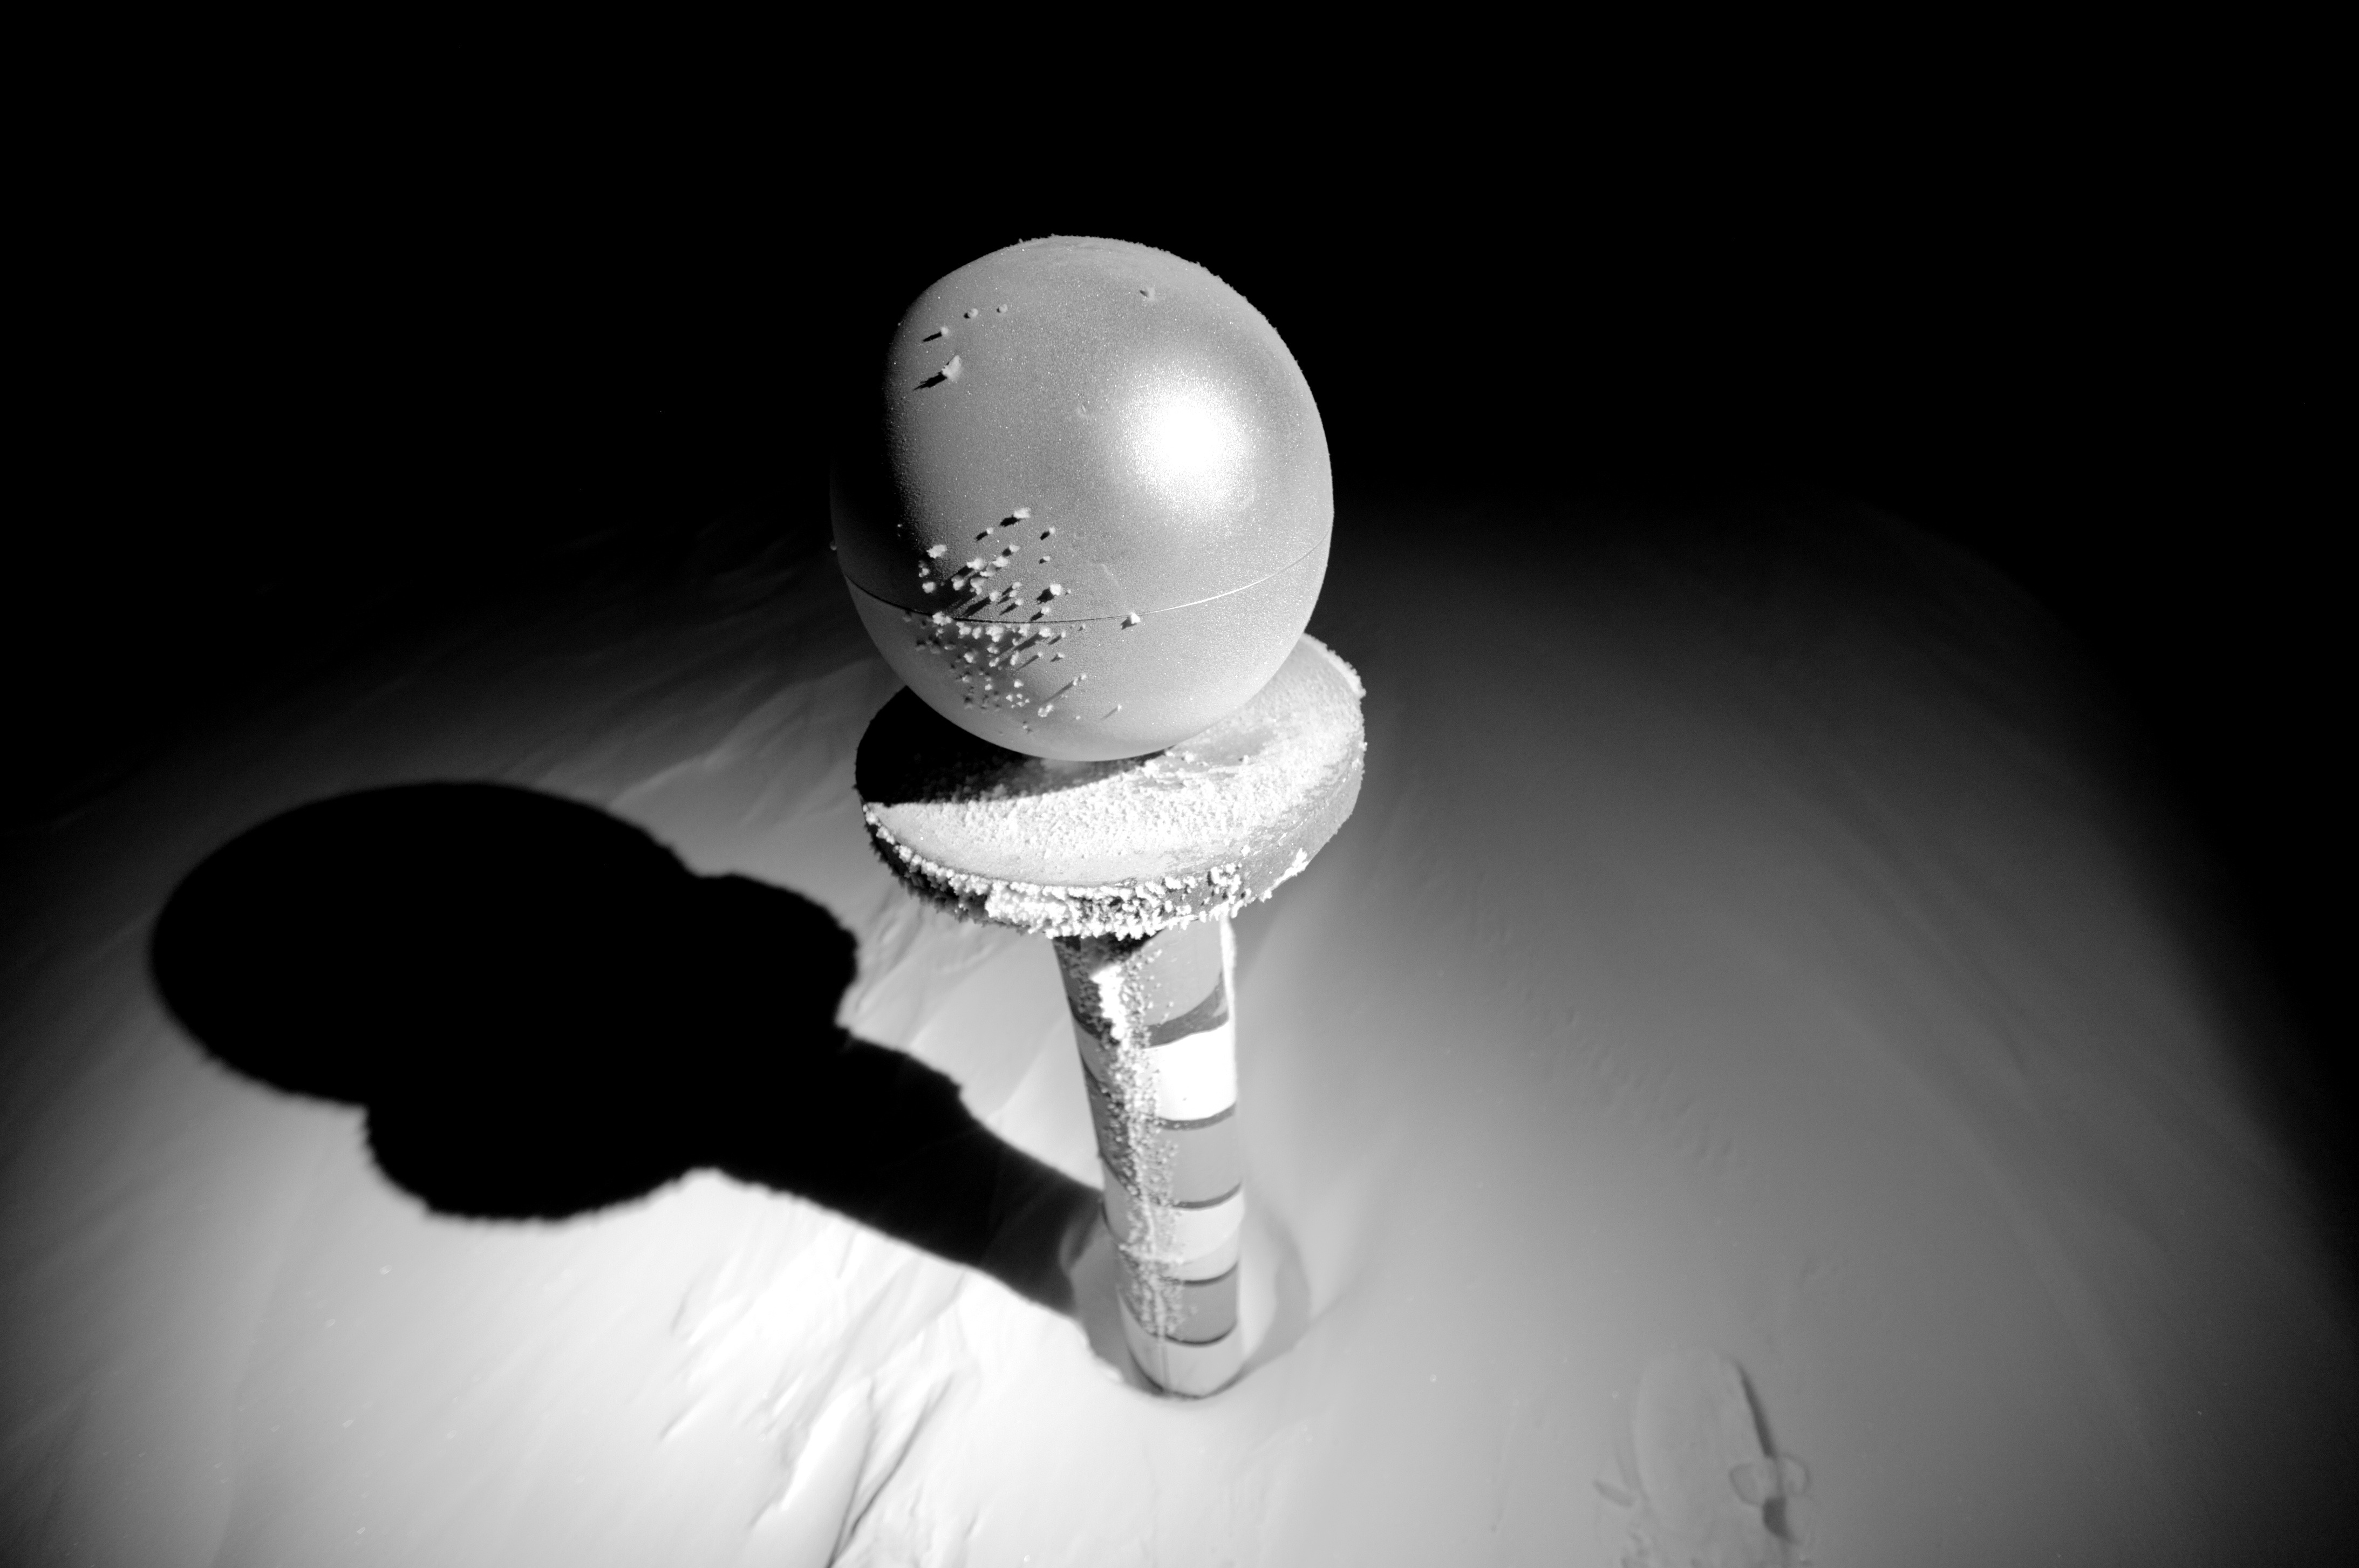 A pole with a sphere on top stands in the snow.